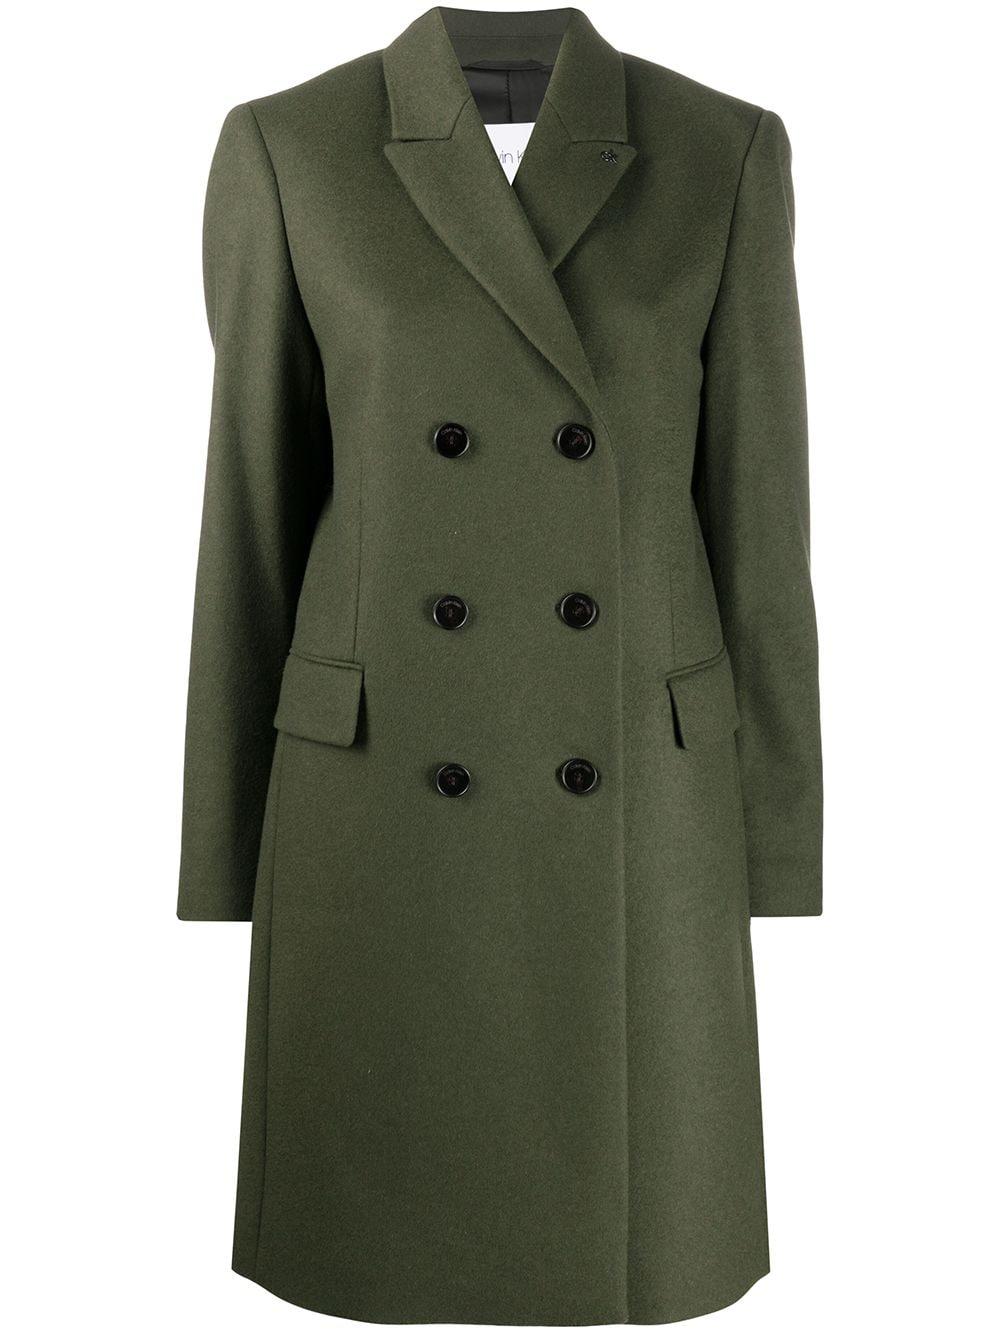 Calvin Klein Wool Double Breasted Coat in Green - Lyst